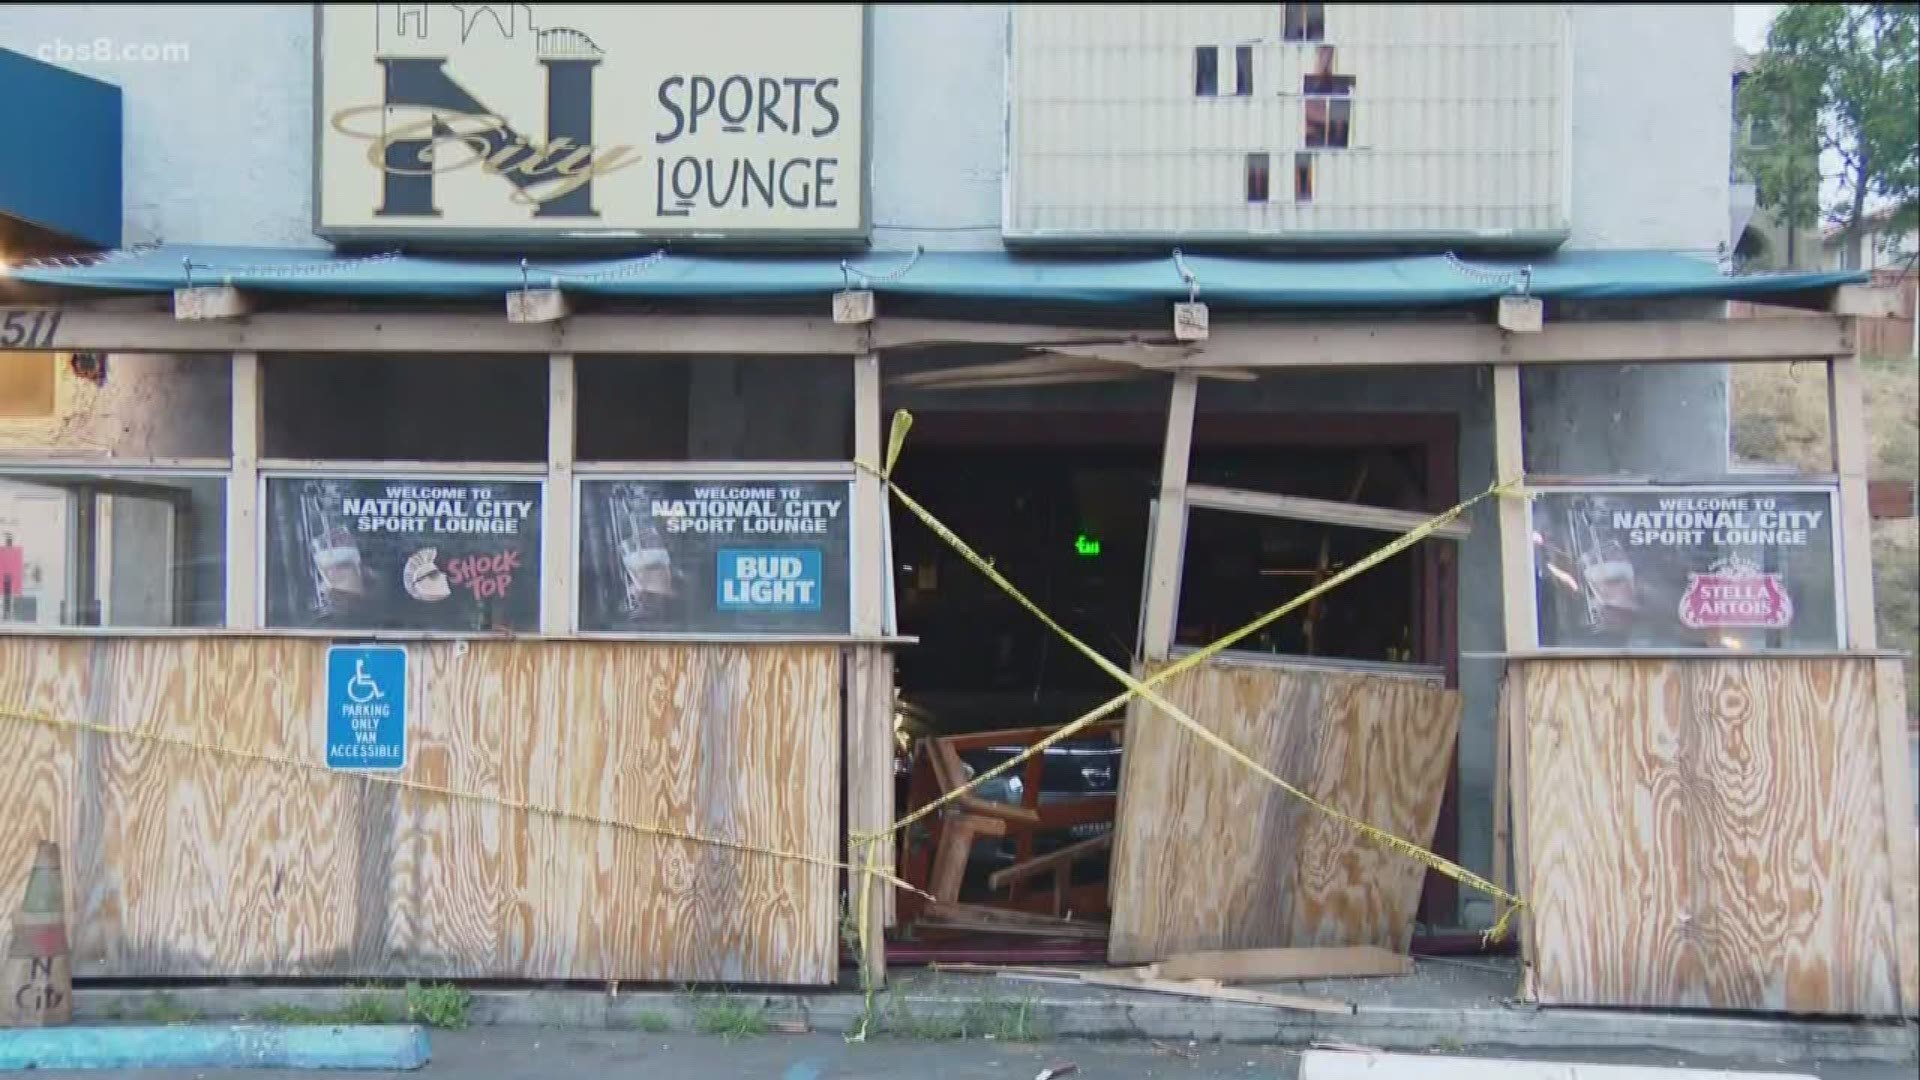 The woman behind the wheel accidentally reversed all the way into the N-City Sports Lounge located at 2511 Sweetwater Road in National City.